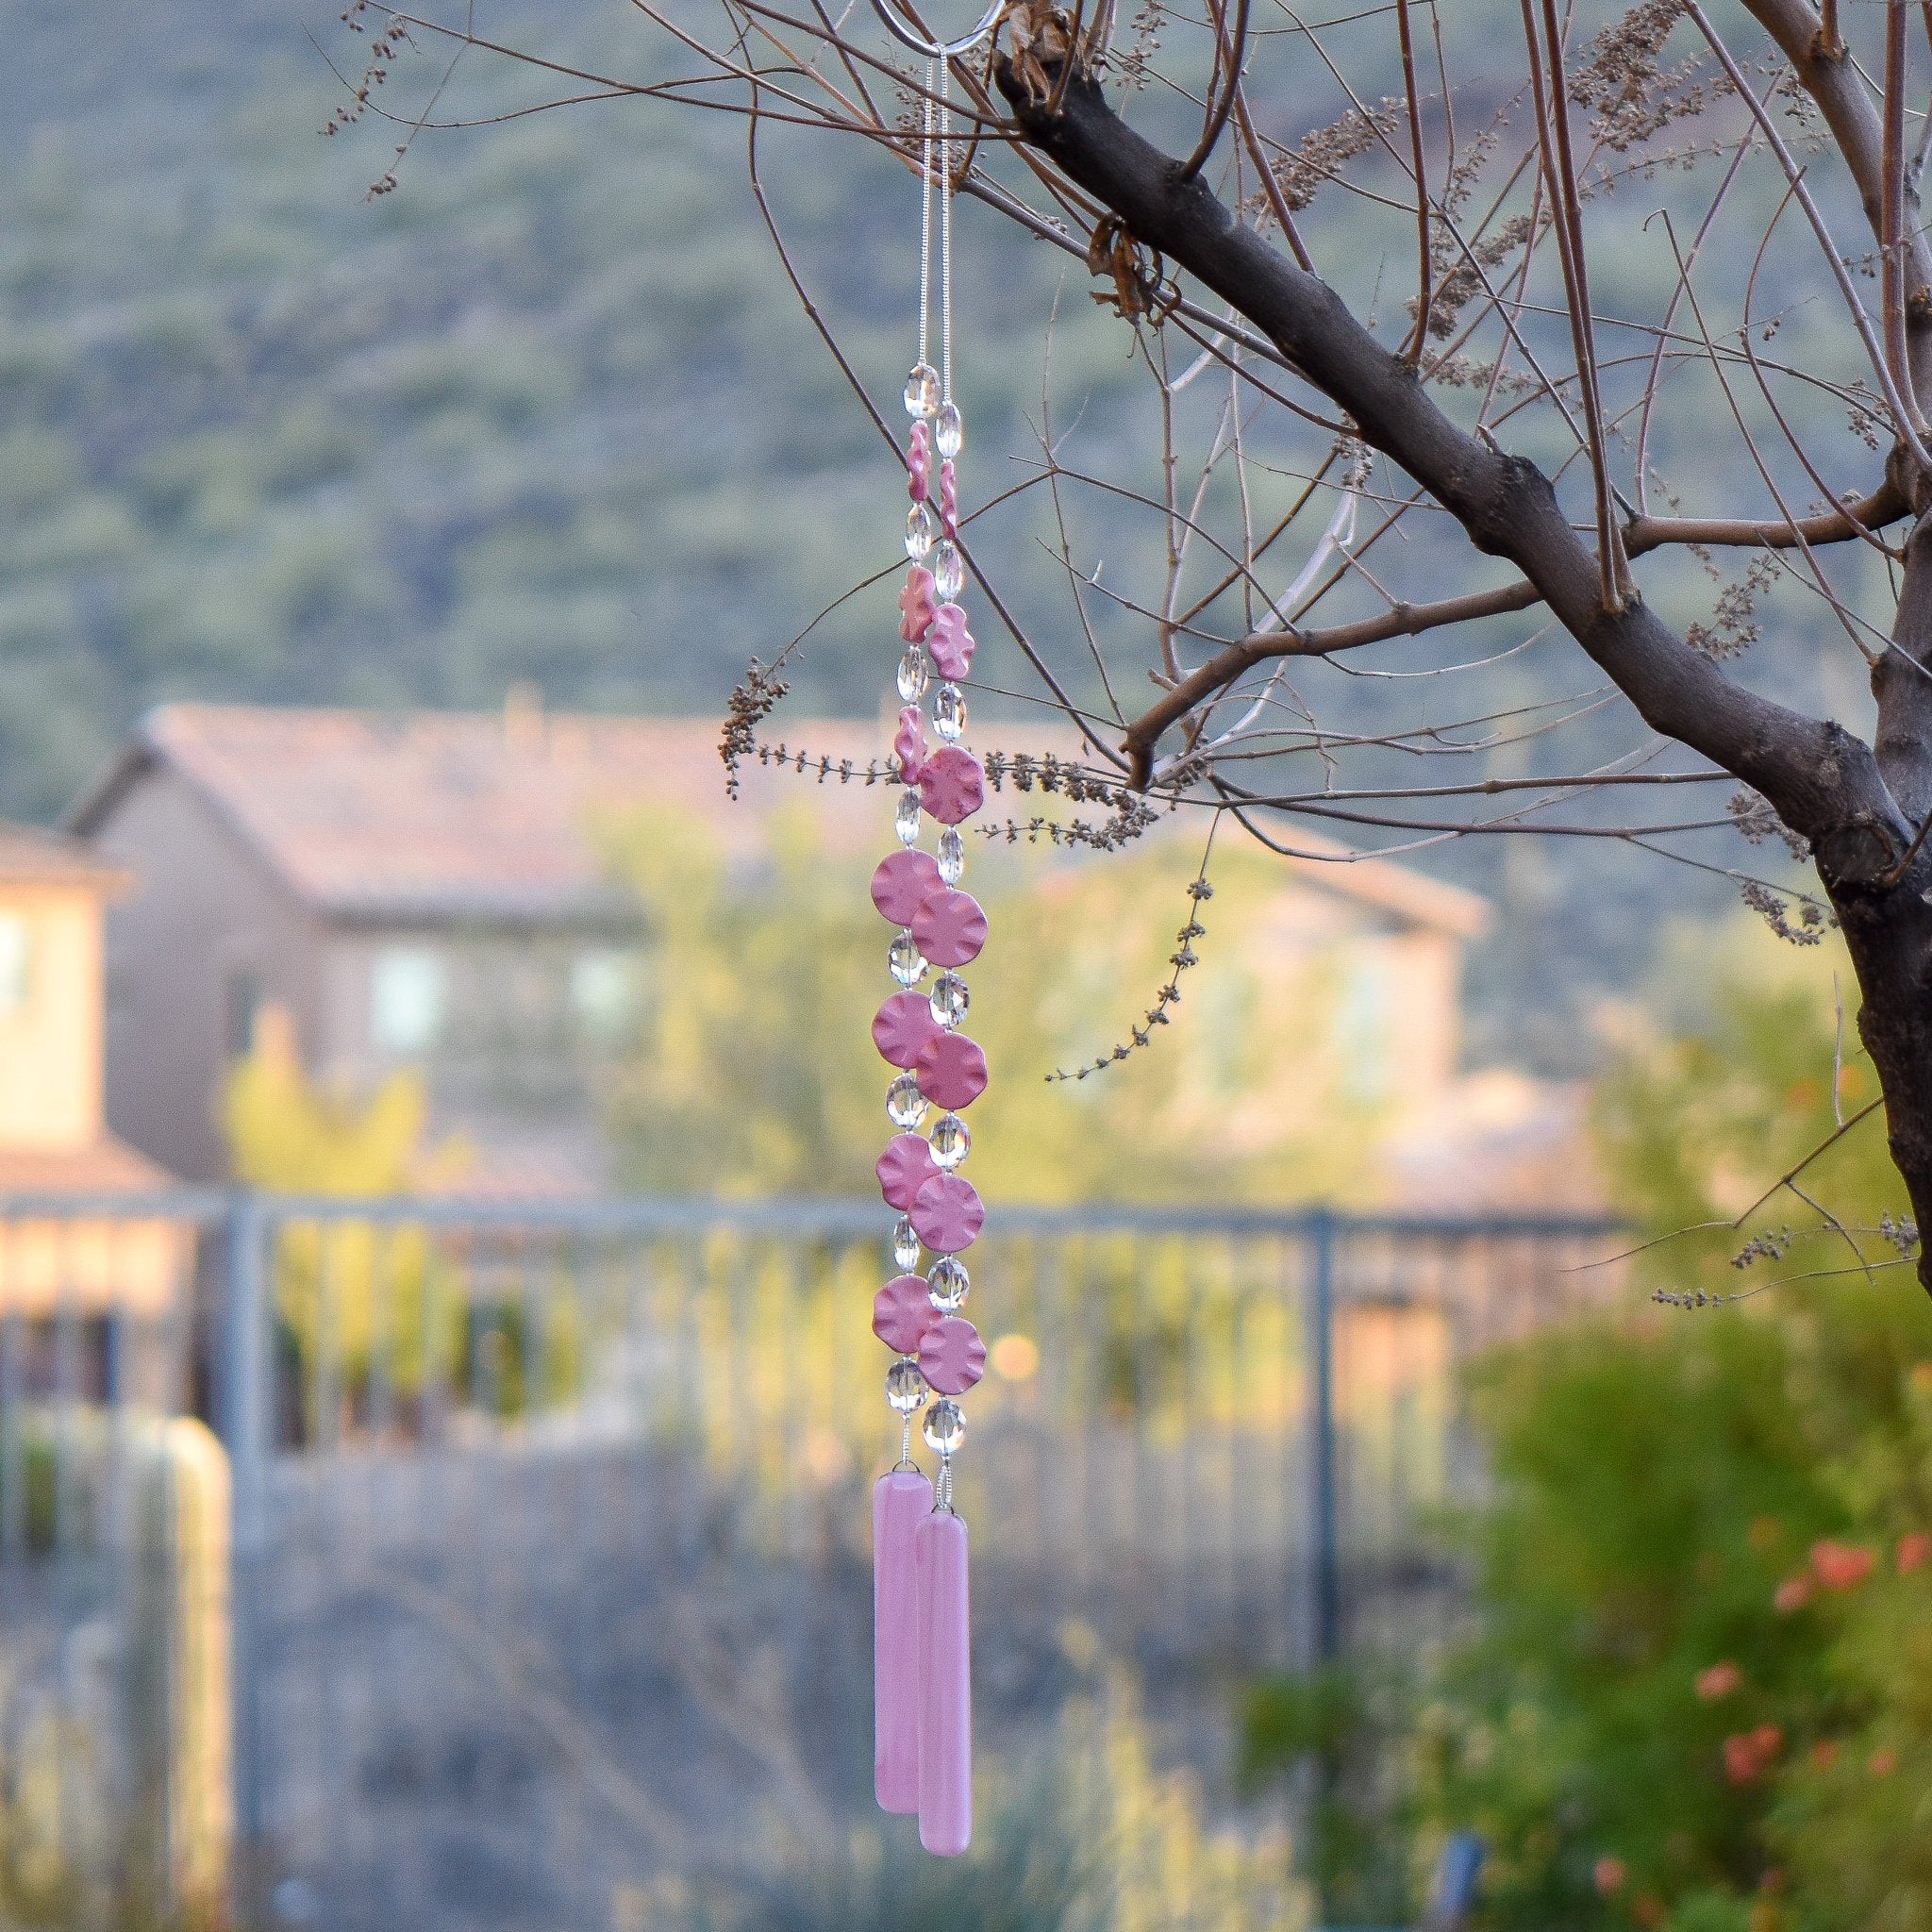 Pink Magnesite Stone Sun-Catcher Wind Chime for Patio, Porch, Garden or Balcony is a Unique Home Gift